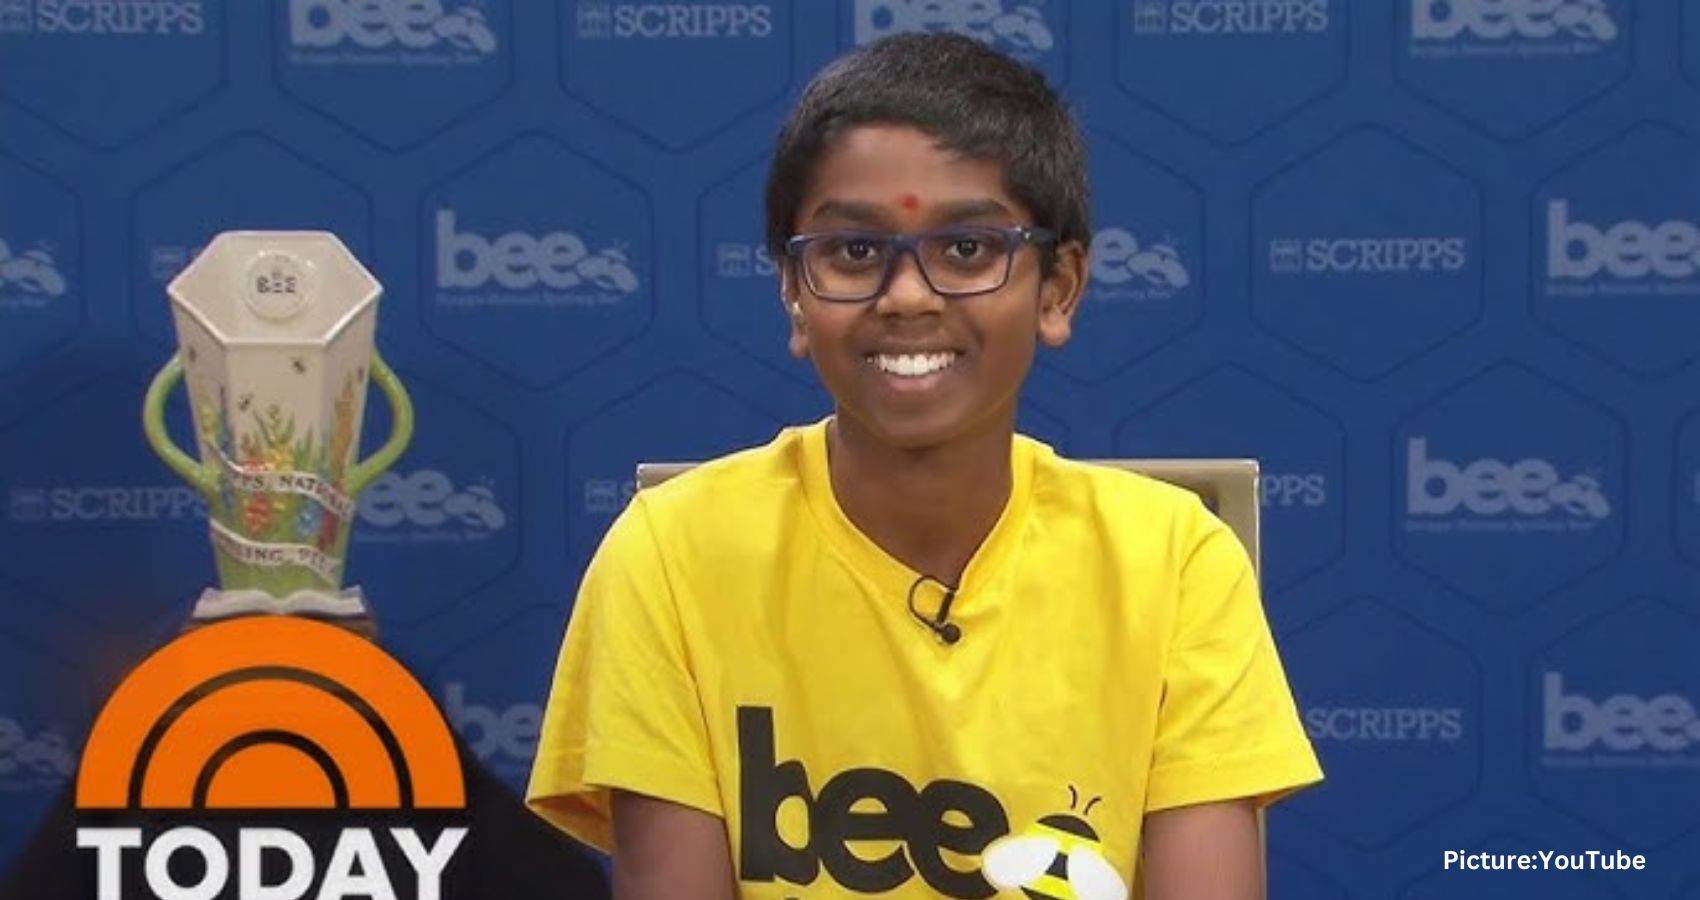 Featured & Cover 12 Year Old Bruhat Soma Triumphs in Thrilling Spell Off to Win 96th Scripps National Spelling Bee